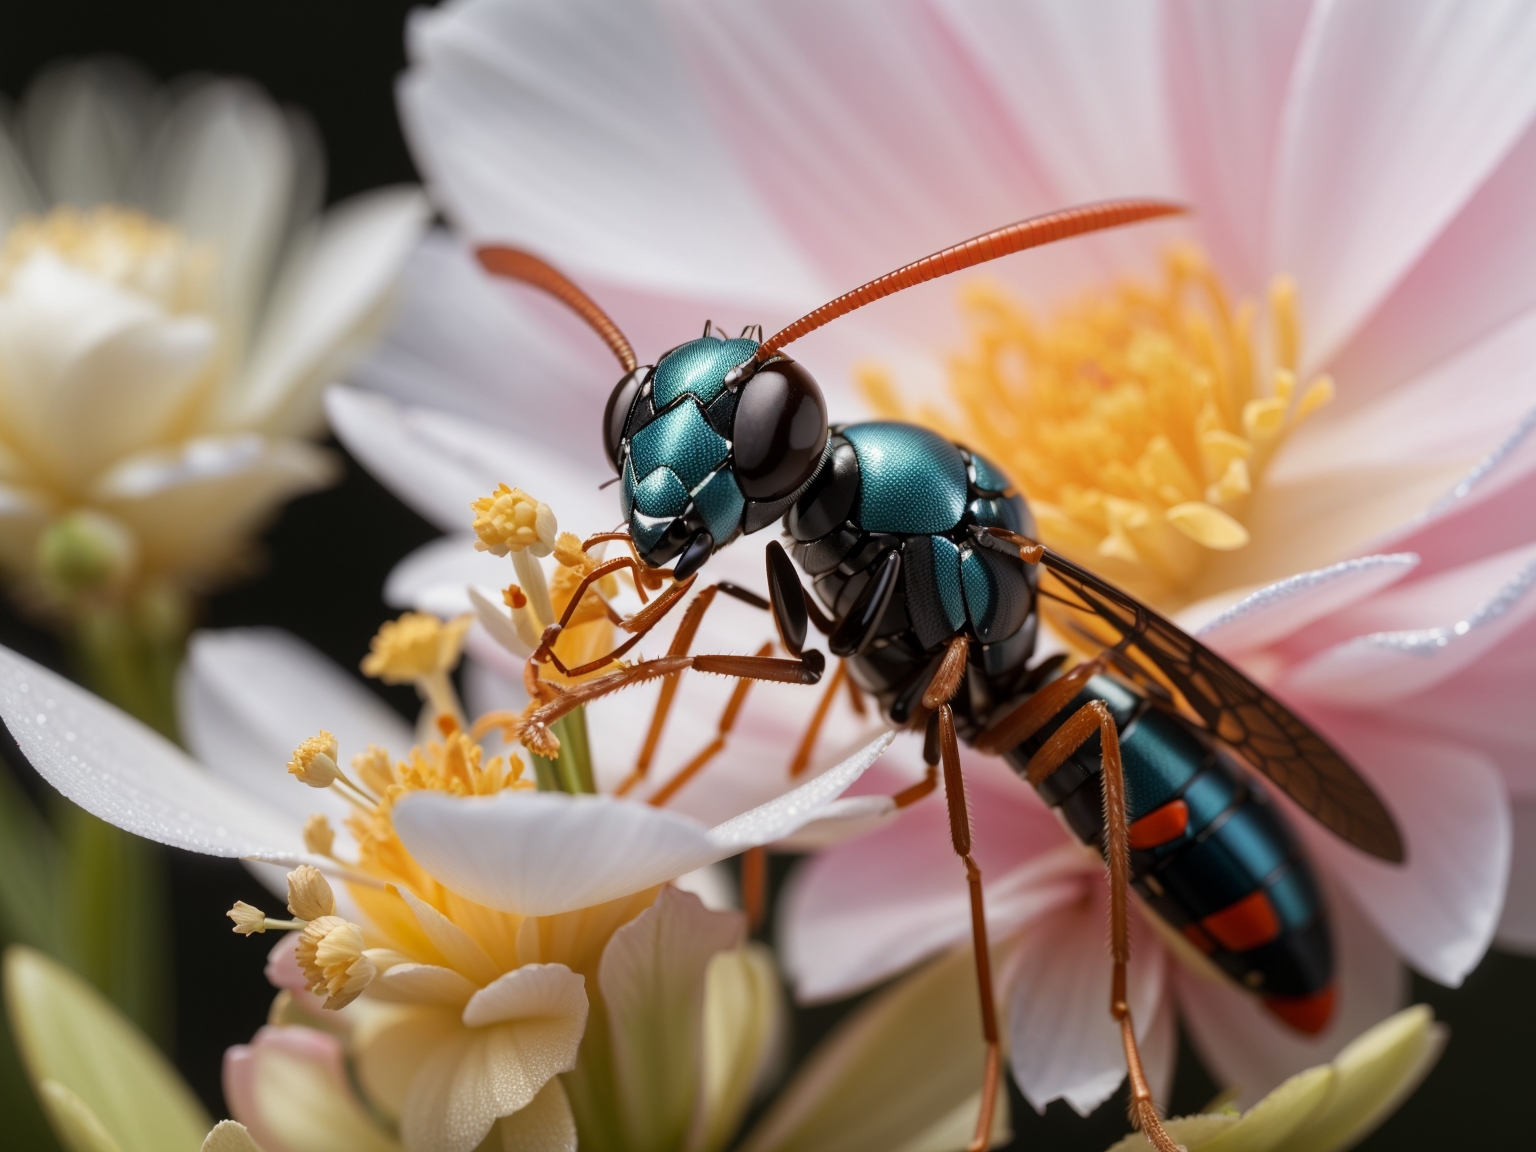 Parasitic wasp on a flower